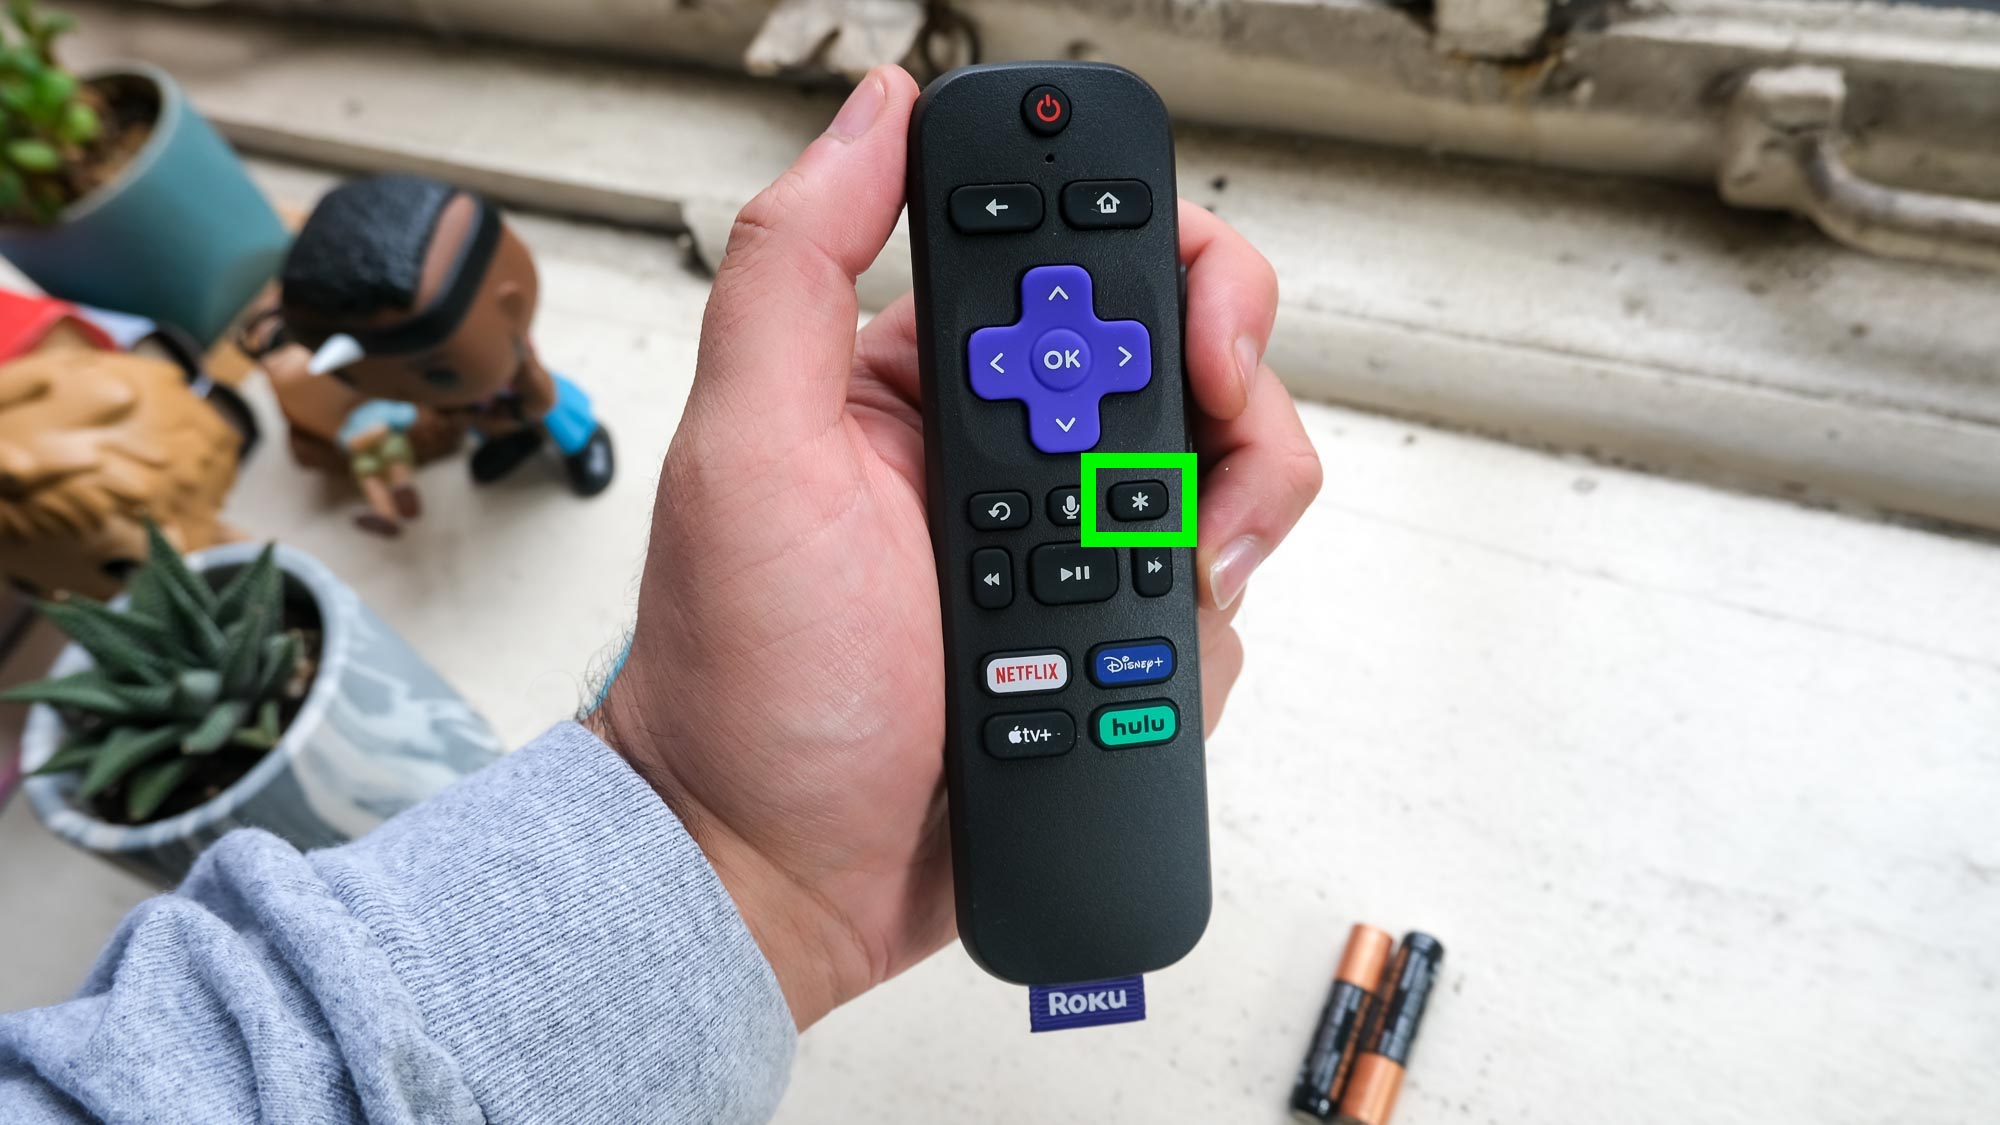 Pressing the * button is the third step to remove a Roku app